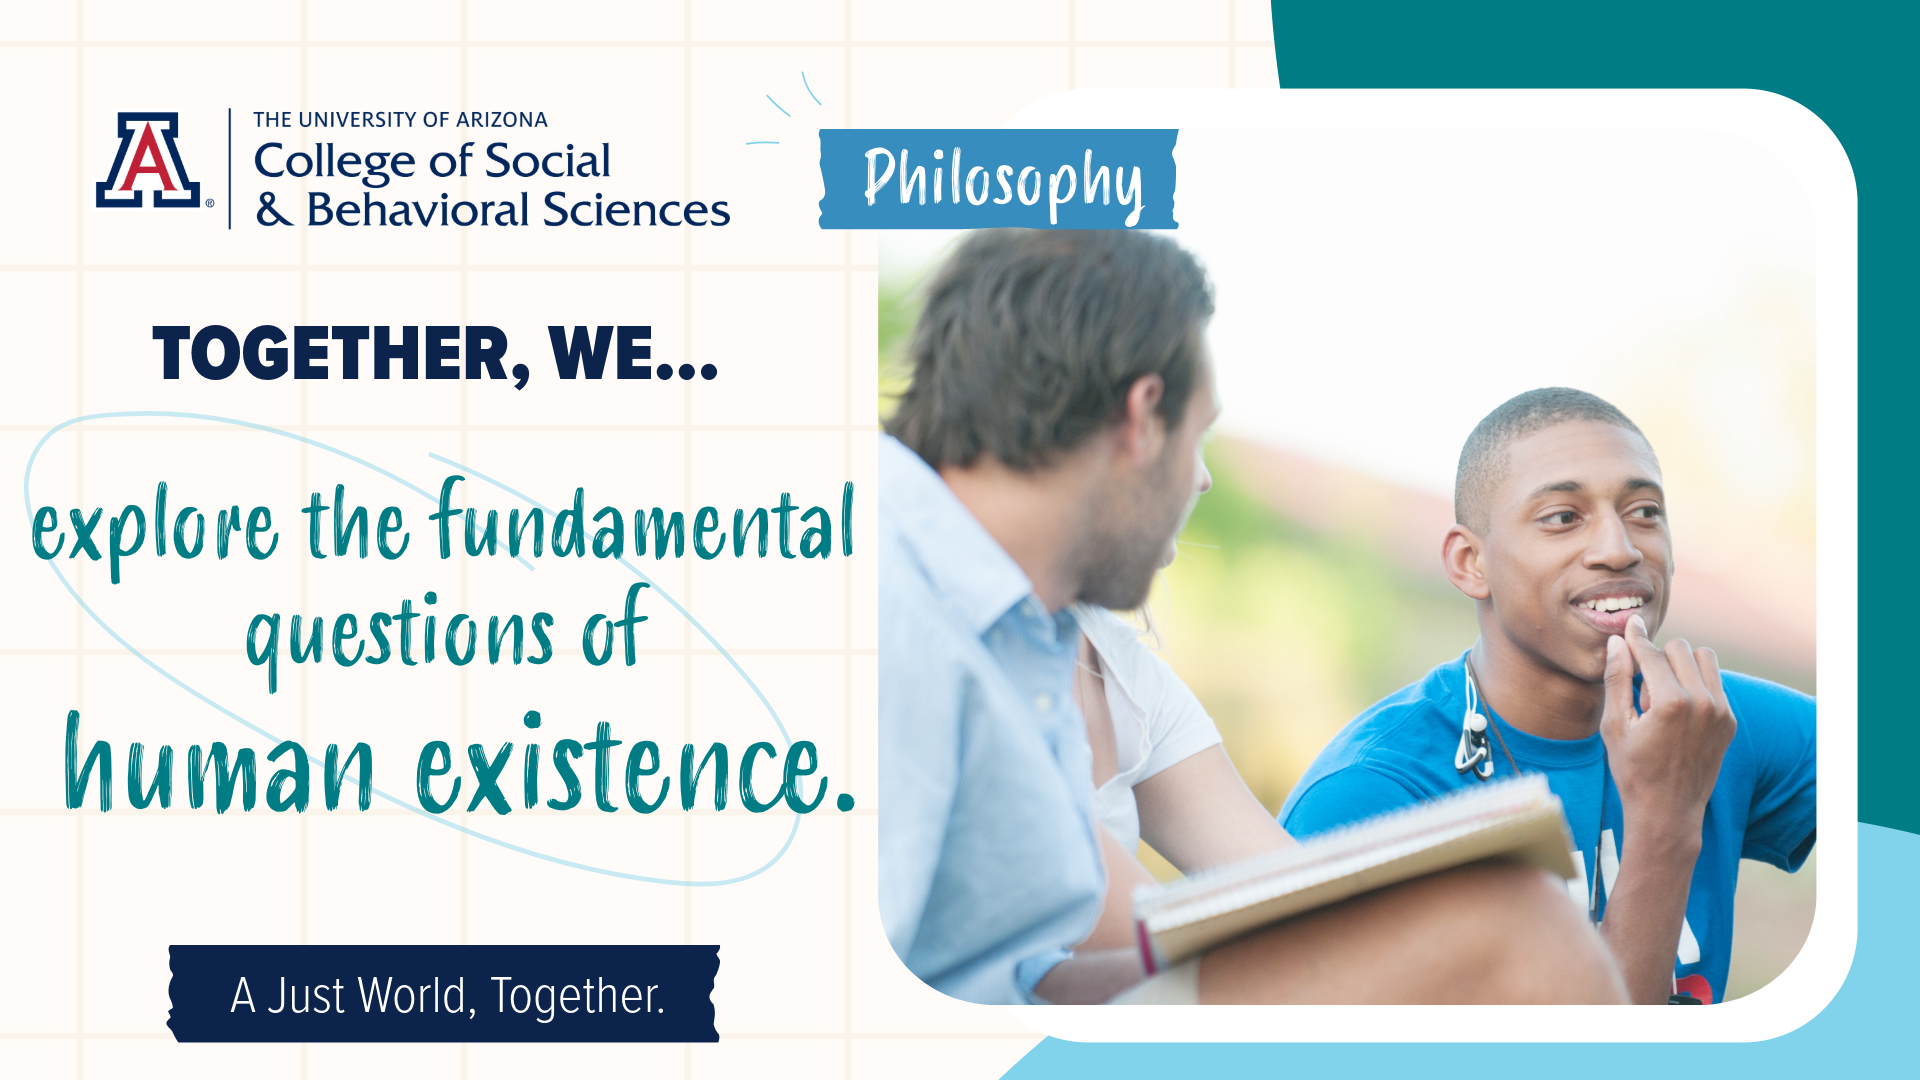 TOGETHER, WE... explore the fundamental questions of human existence.